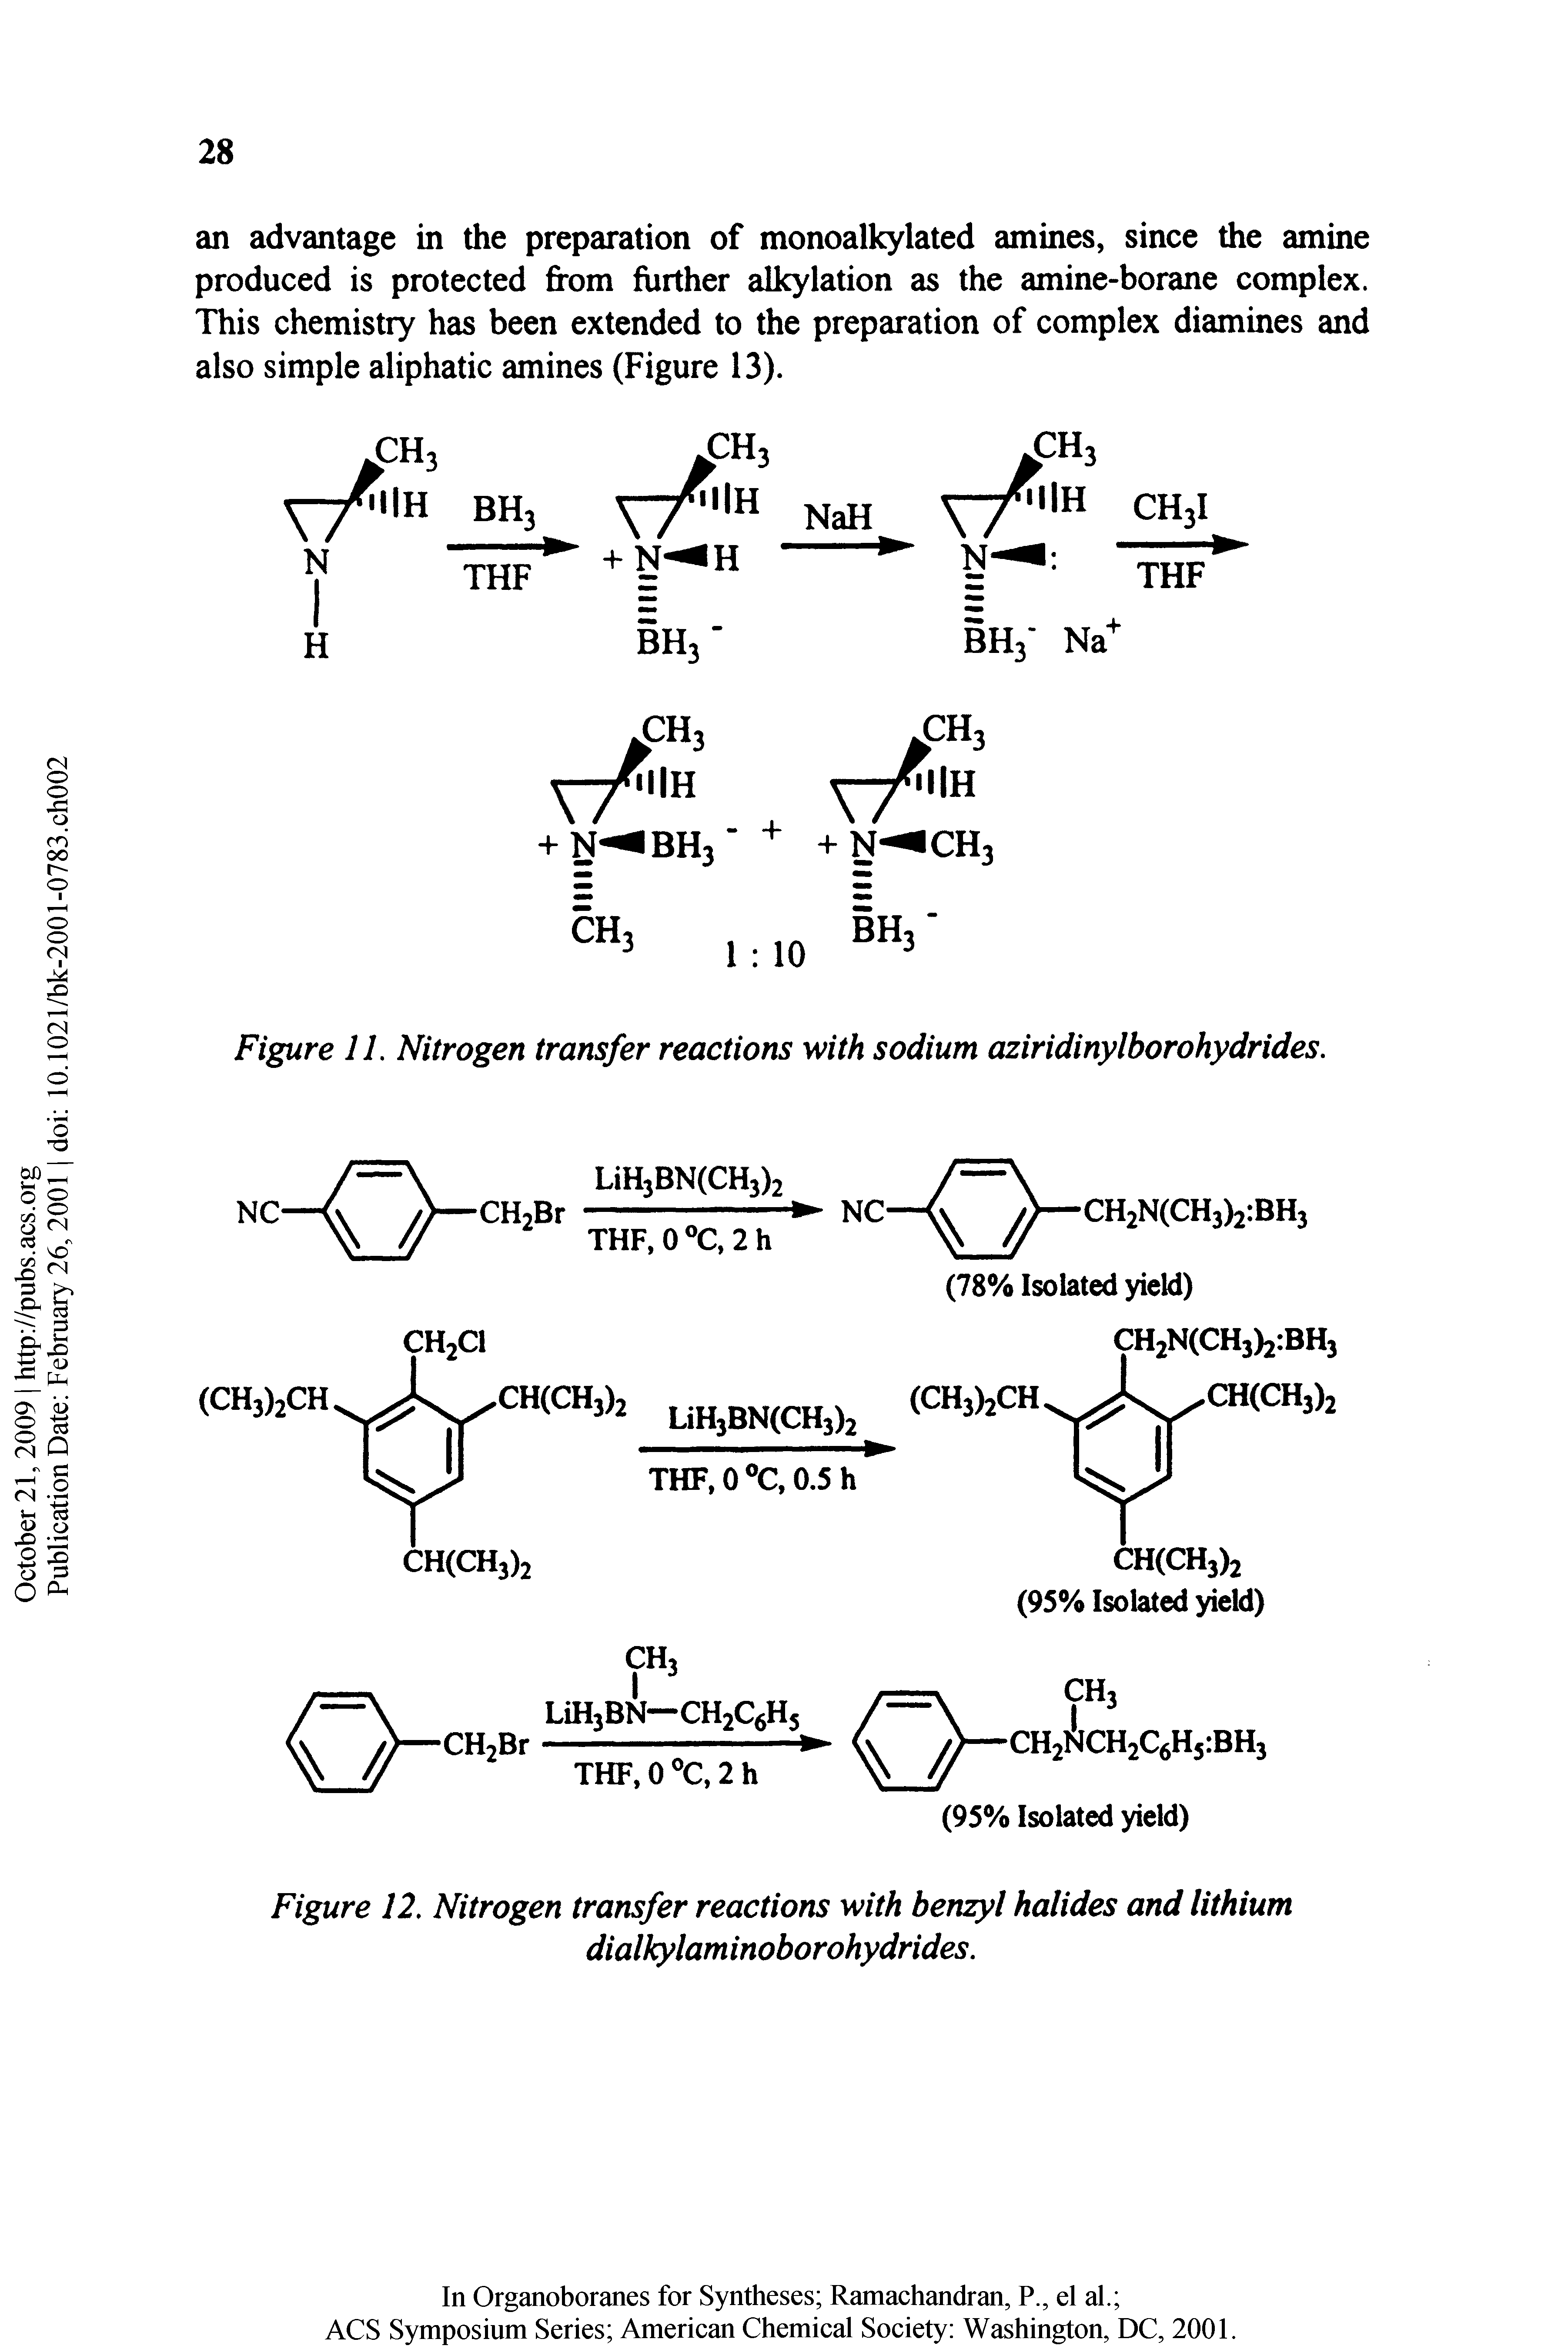 Figure 12. Nitrogen transfer reactions with benzyl halides and lithium dialkylaminoborohydrides.